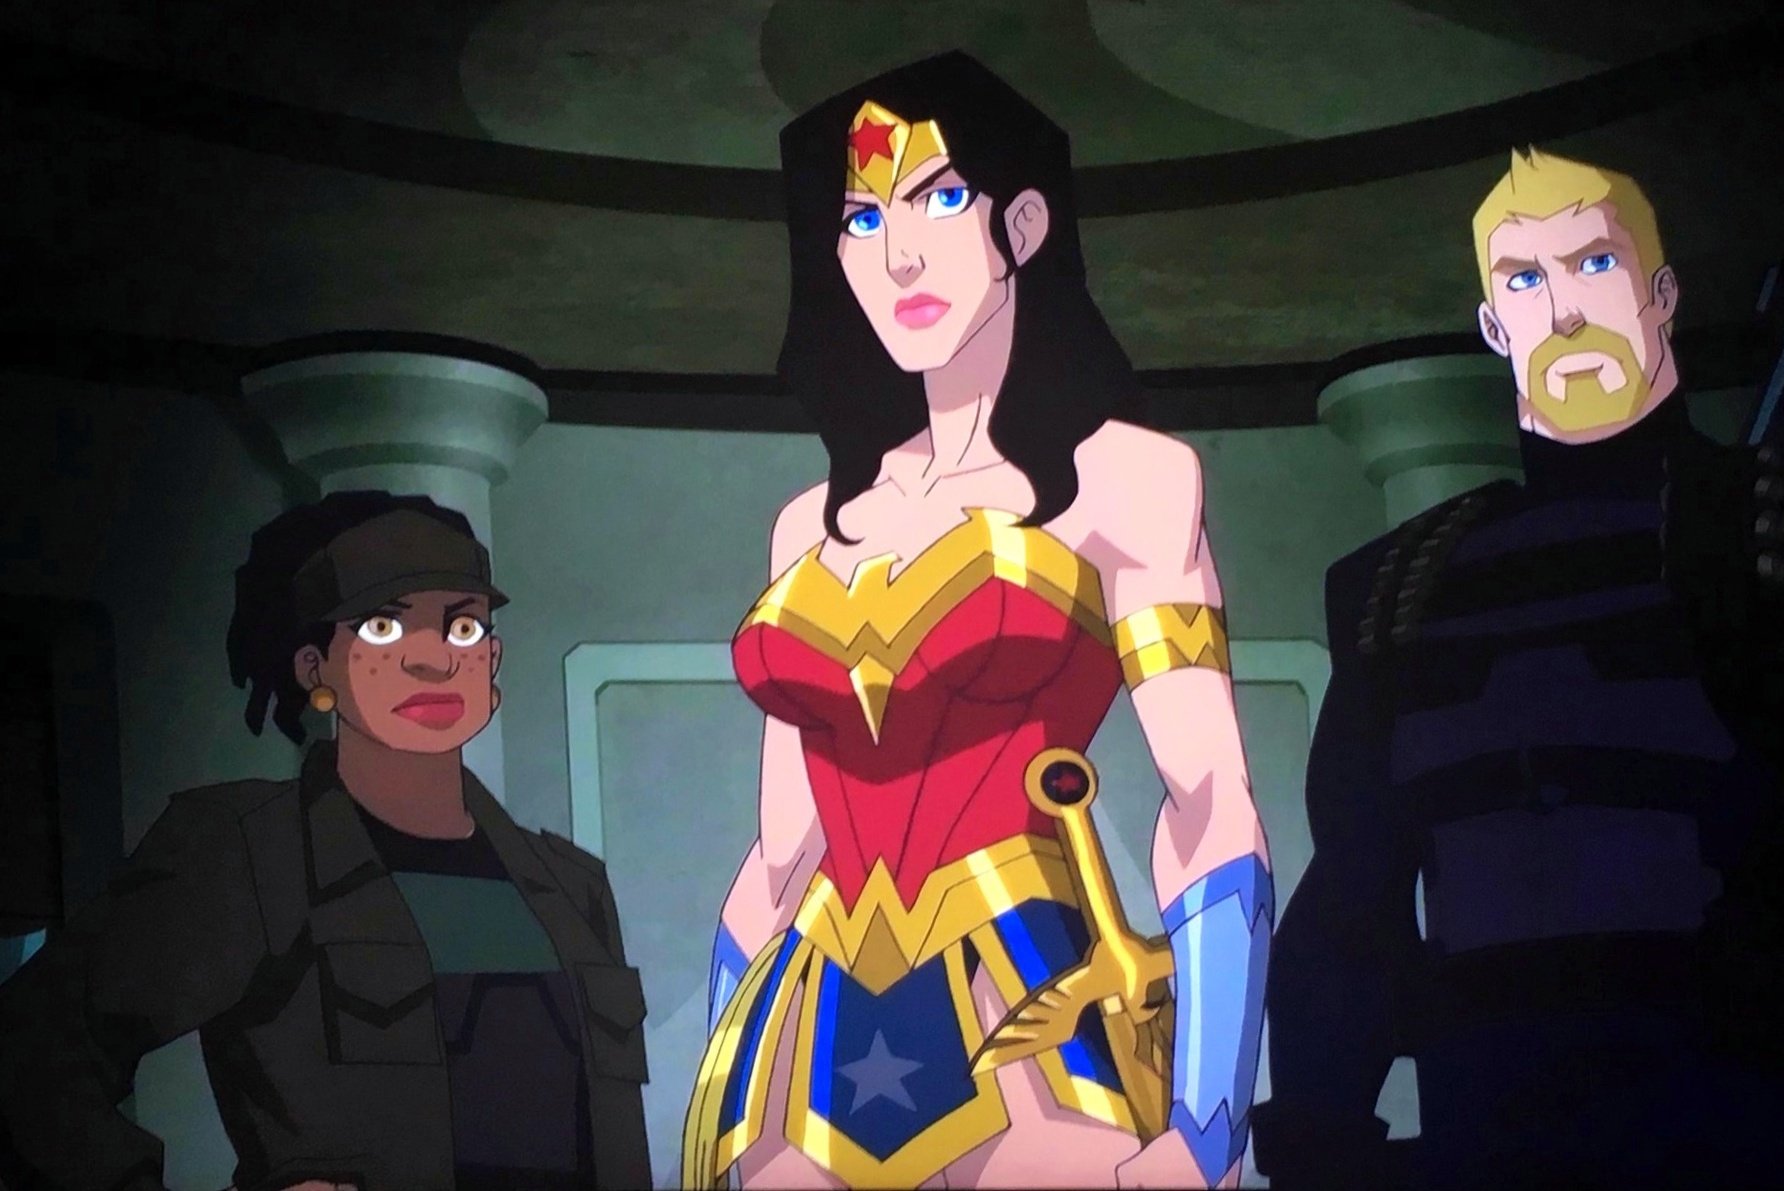 Review] Wonder Woman: Bloodlines (2019) – The Cultured Nerd